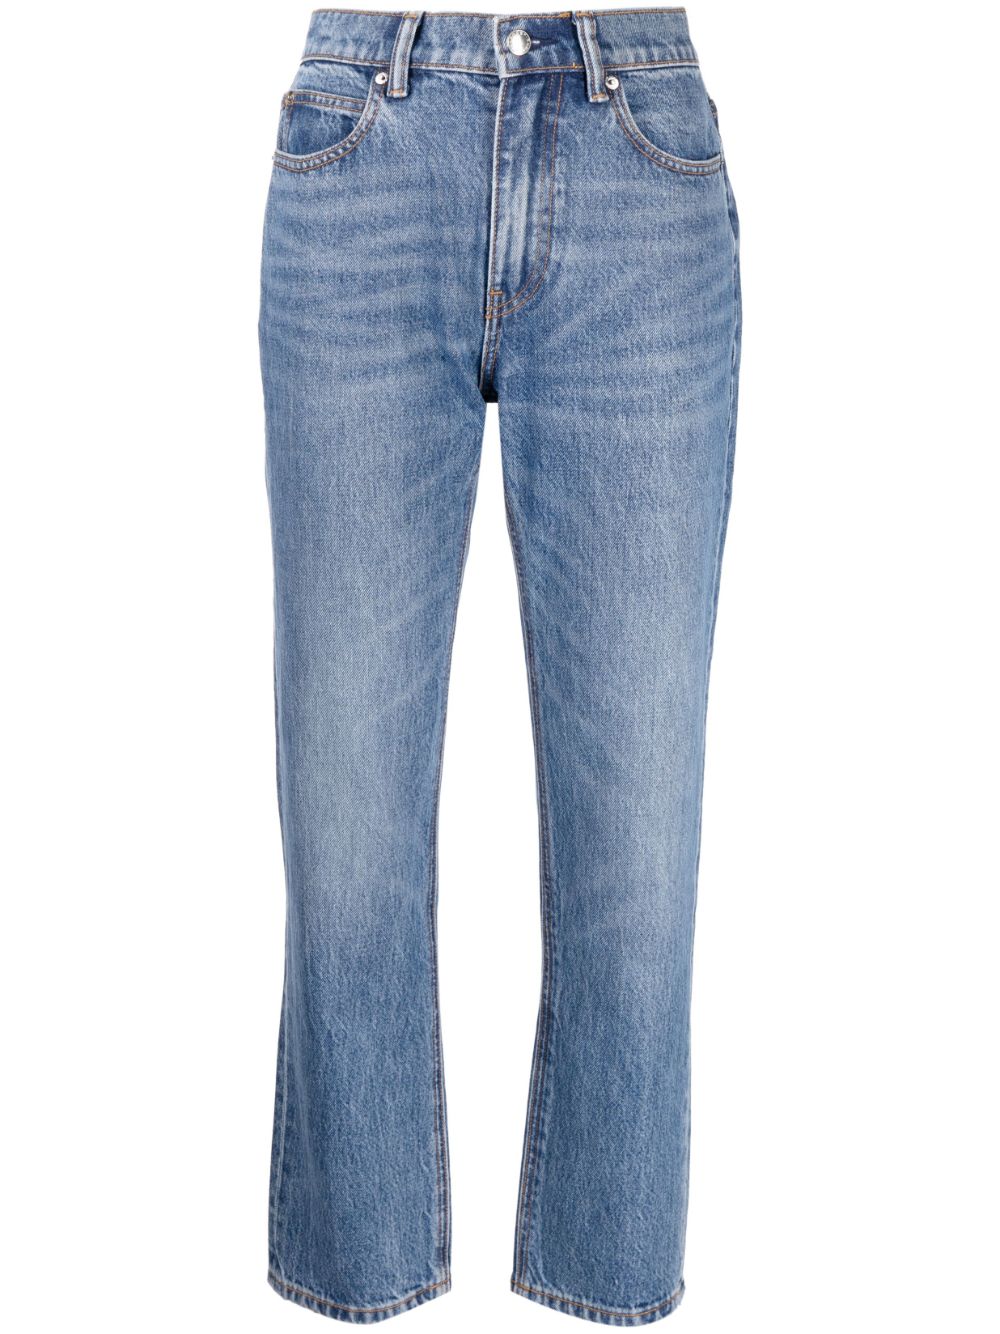 OG high-rise stovepipe jeans